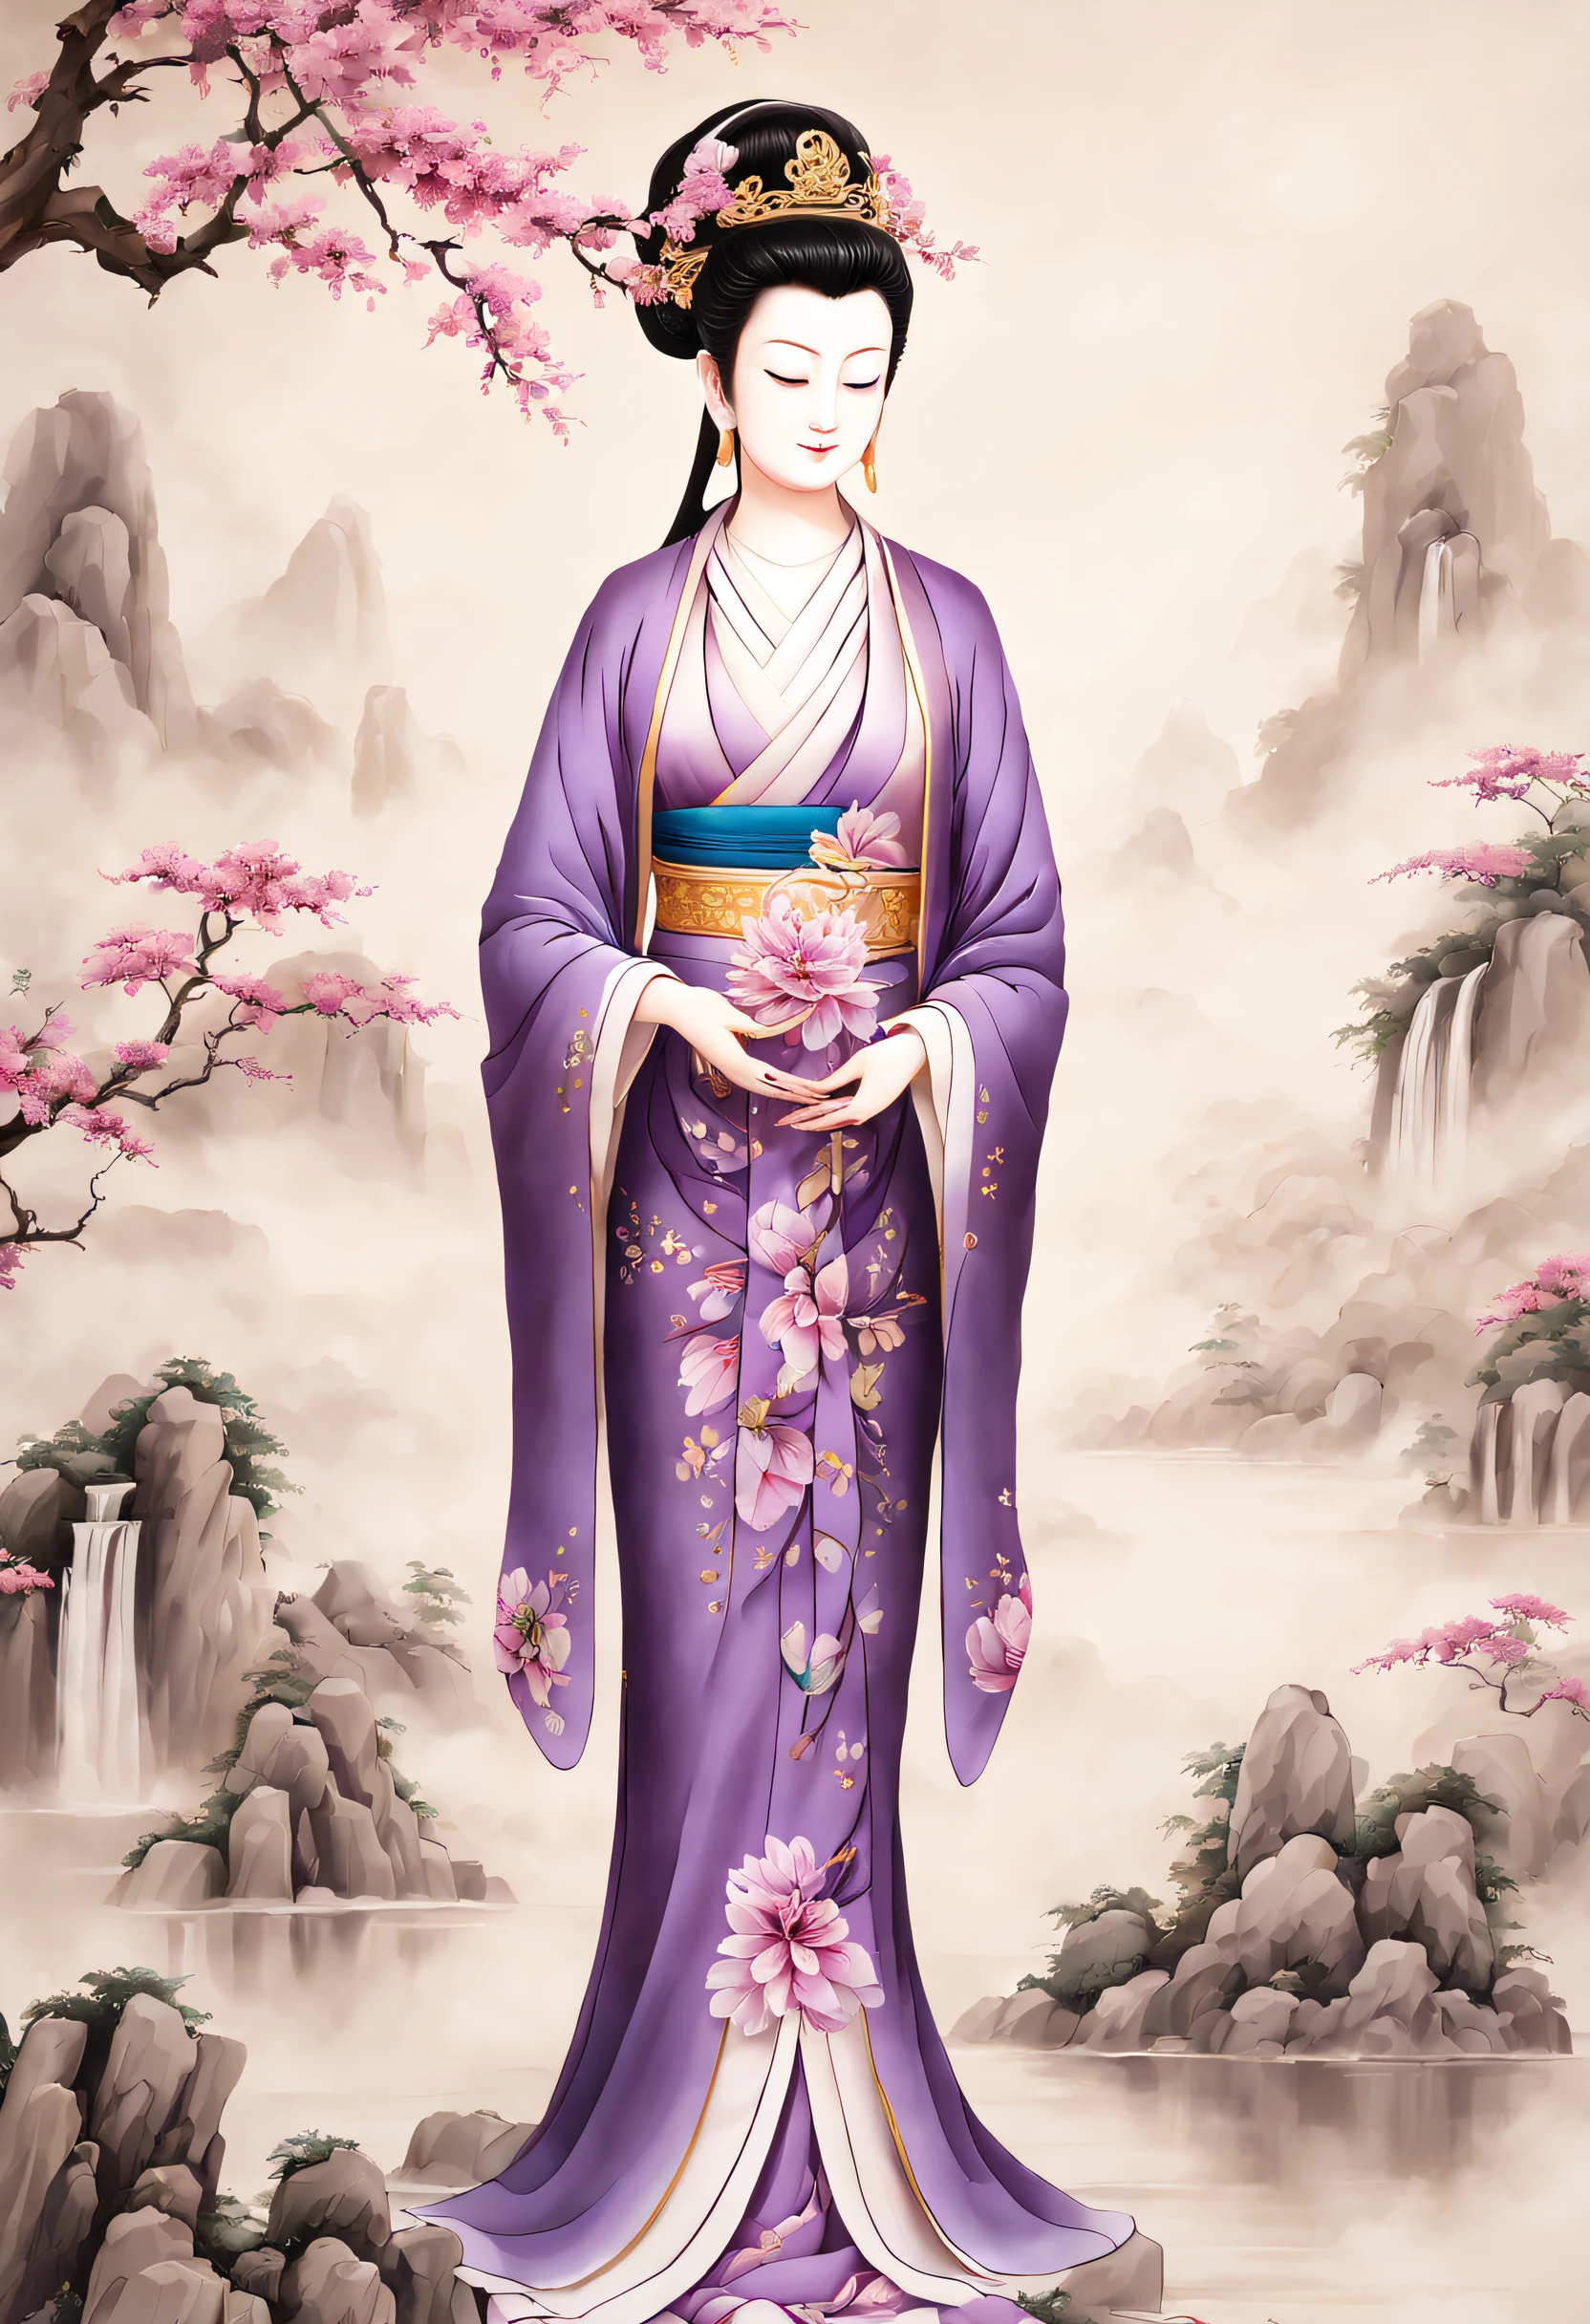 ( Embroidery works), (Suzhou embroidered purple robe Guanyin statue), (standing full-body), embroidery, Kesi silk craft,Embroidery works, The center is Ziguanyin，Surrounded by realistic embroidered flowers, Rectangular glass frame combination, line sleek, bird's eyes view, gold background, Realistic embroidery details, k hd, - Niji 5 style expression,
Avalokitesvara&#39;s expression is peaceful and peaceful, Her eyes are slightly closed, It was as if lost in thought. Her face is round, Her lines are smooth, Full of compassion and wisdom, And the corners of his mouth were slightly raised, show a calm smile,  People feel a sense of tranquility and comfort,
Avalokitesvara&#39;sFingers are slender and strong, Expose your hands to your chest, As if she could drive away all the suffering in the world, Symbolizes love and blessings to the world，Every stitch embodies the hard work and wisdom of the craftsmen...,  Her clothes are gorgeous and solemn, The color is mainly dark purple, Show her nobility and mystery. Her robe is embroidered with exquisite flowers and auspicious patterns, Sparkling，realistically.，These patterns complement the main color of purple,  The whole picture is more vivid and three-dimensional,
 The entire Suzhou embroidery work of Guanyin in Purple Clothes gives people a solemn and sacred feeling.., It’s as if you can feel the compassion and wisdom of Guanyin. This piece is a real work of art.,Su Embroidery Purple Clothes Guanyin Workquisite craftsmanship，Vivid image，attention-grabbing.